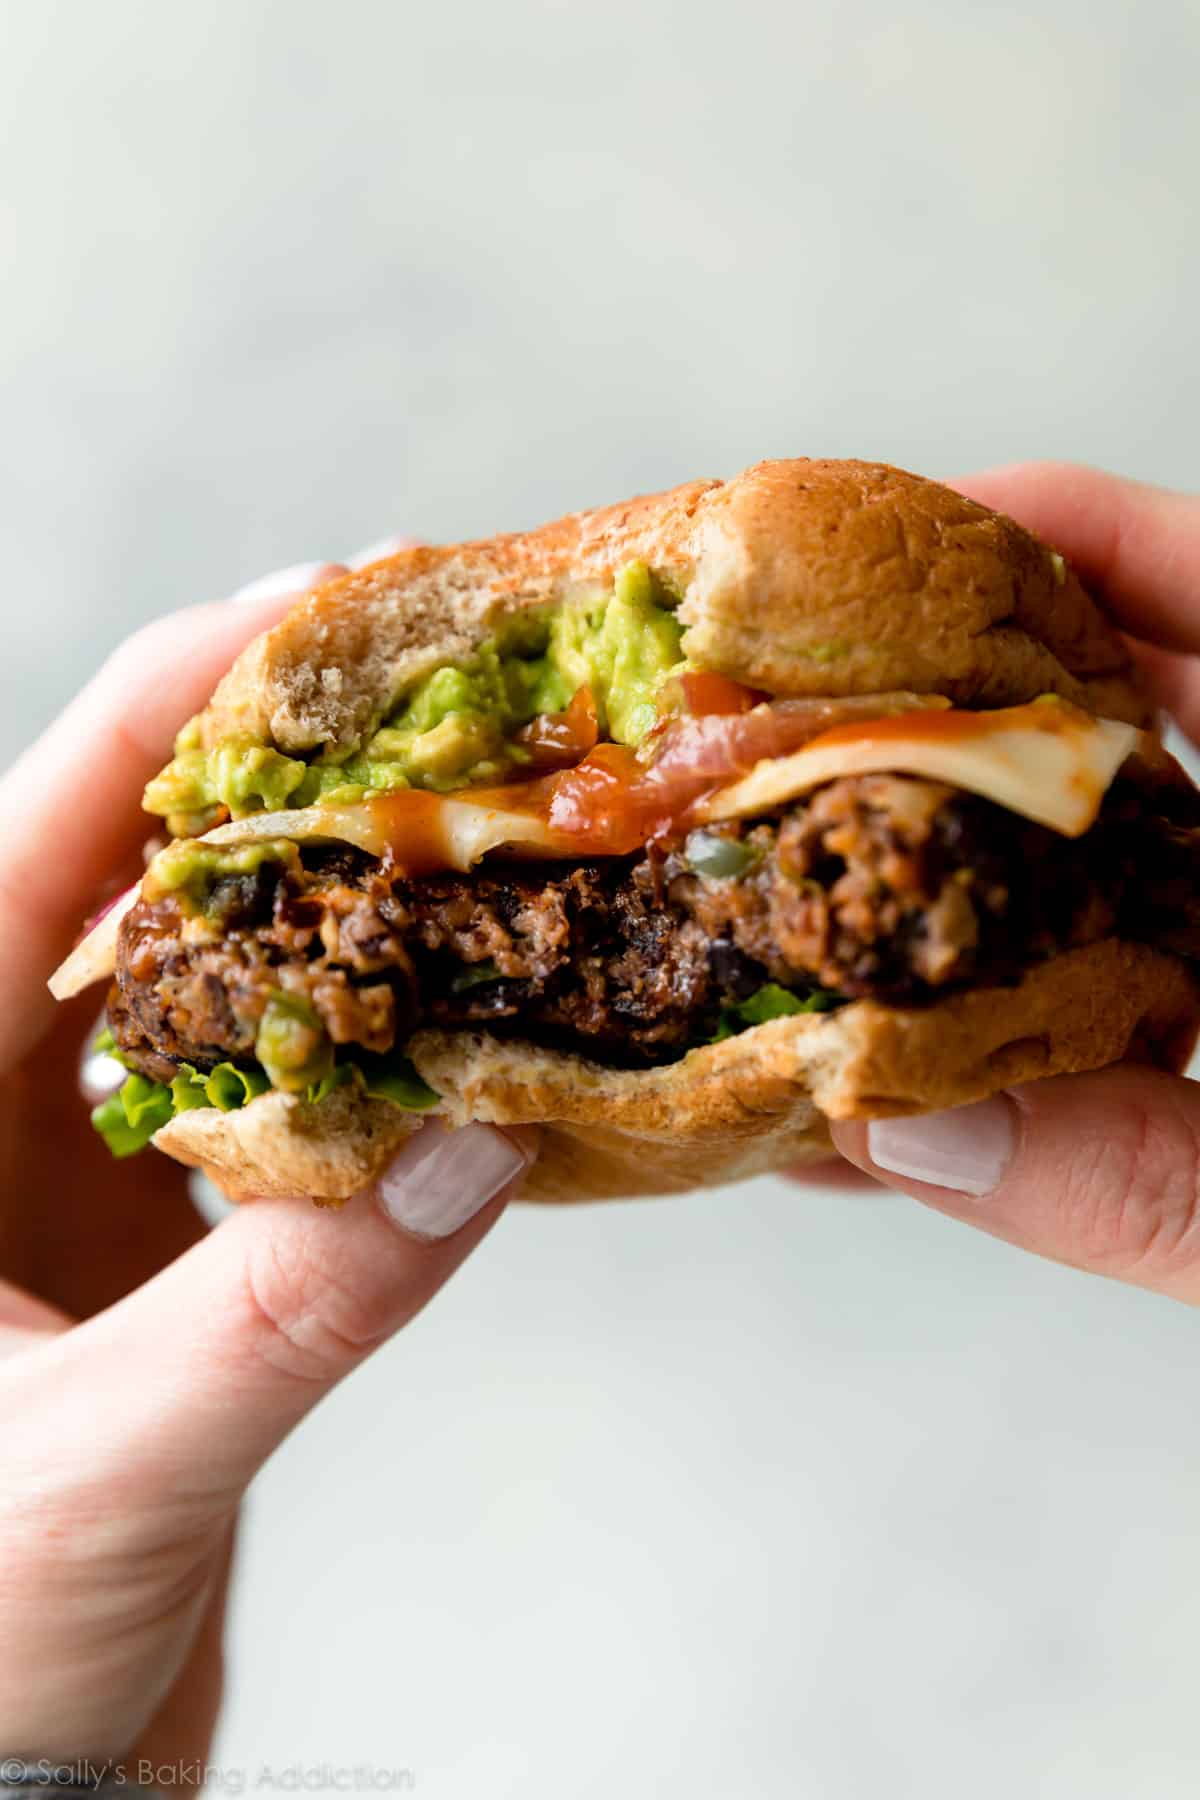 hands holding a black bean burger with a bite taken from it